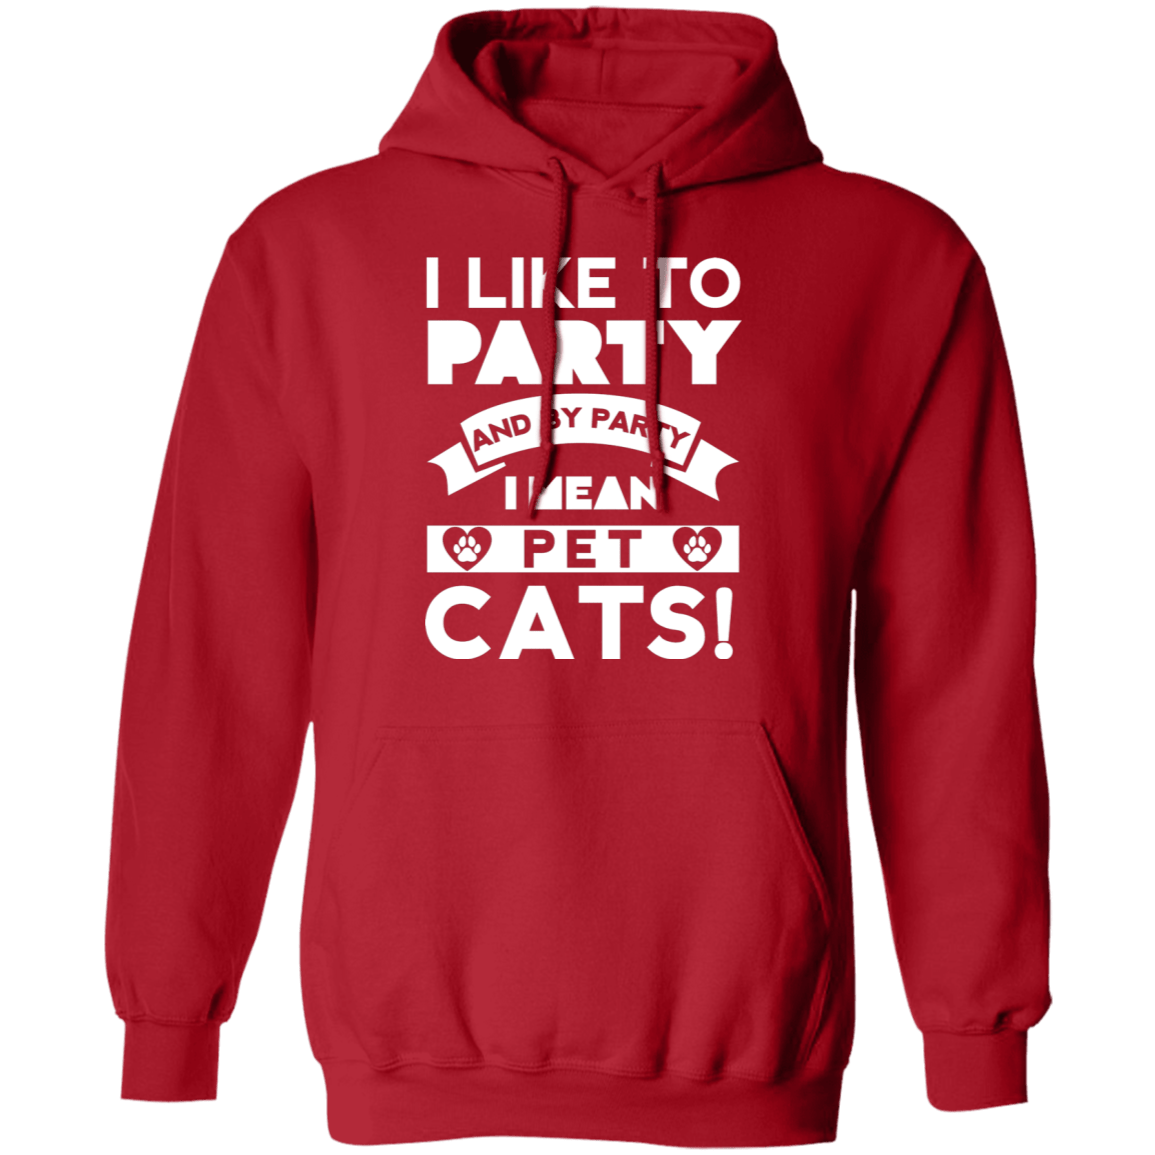 I Like To Party Cats - Hoodie.